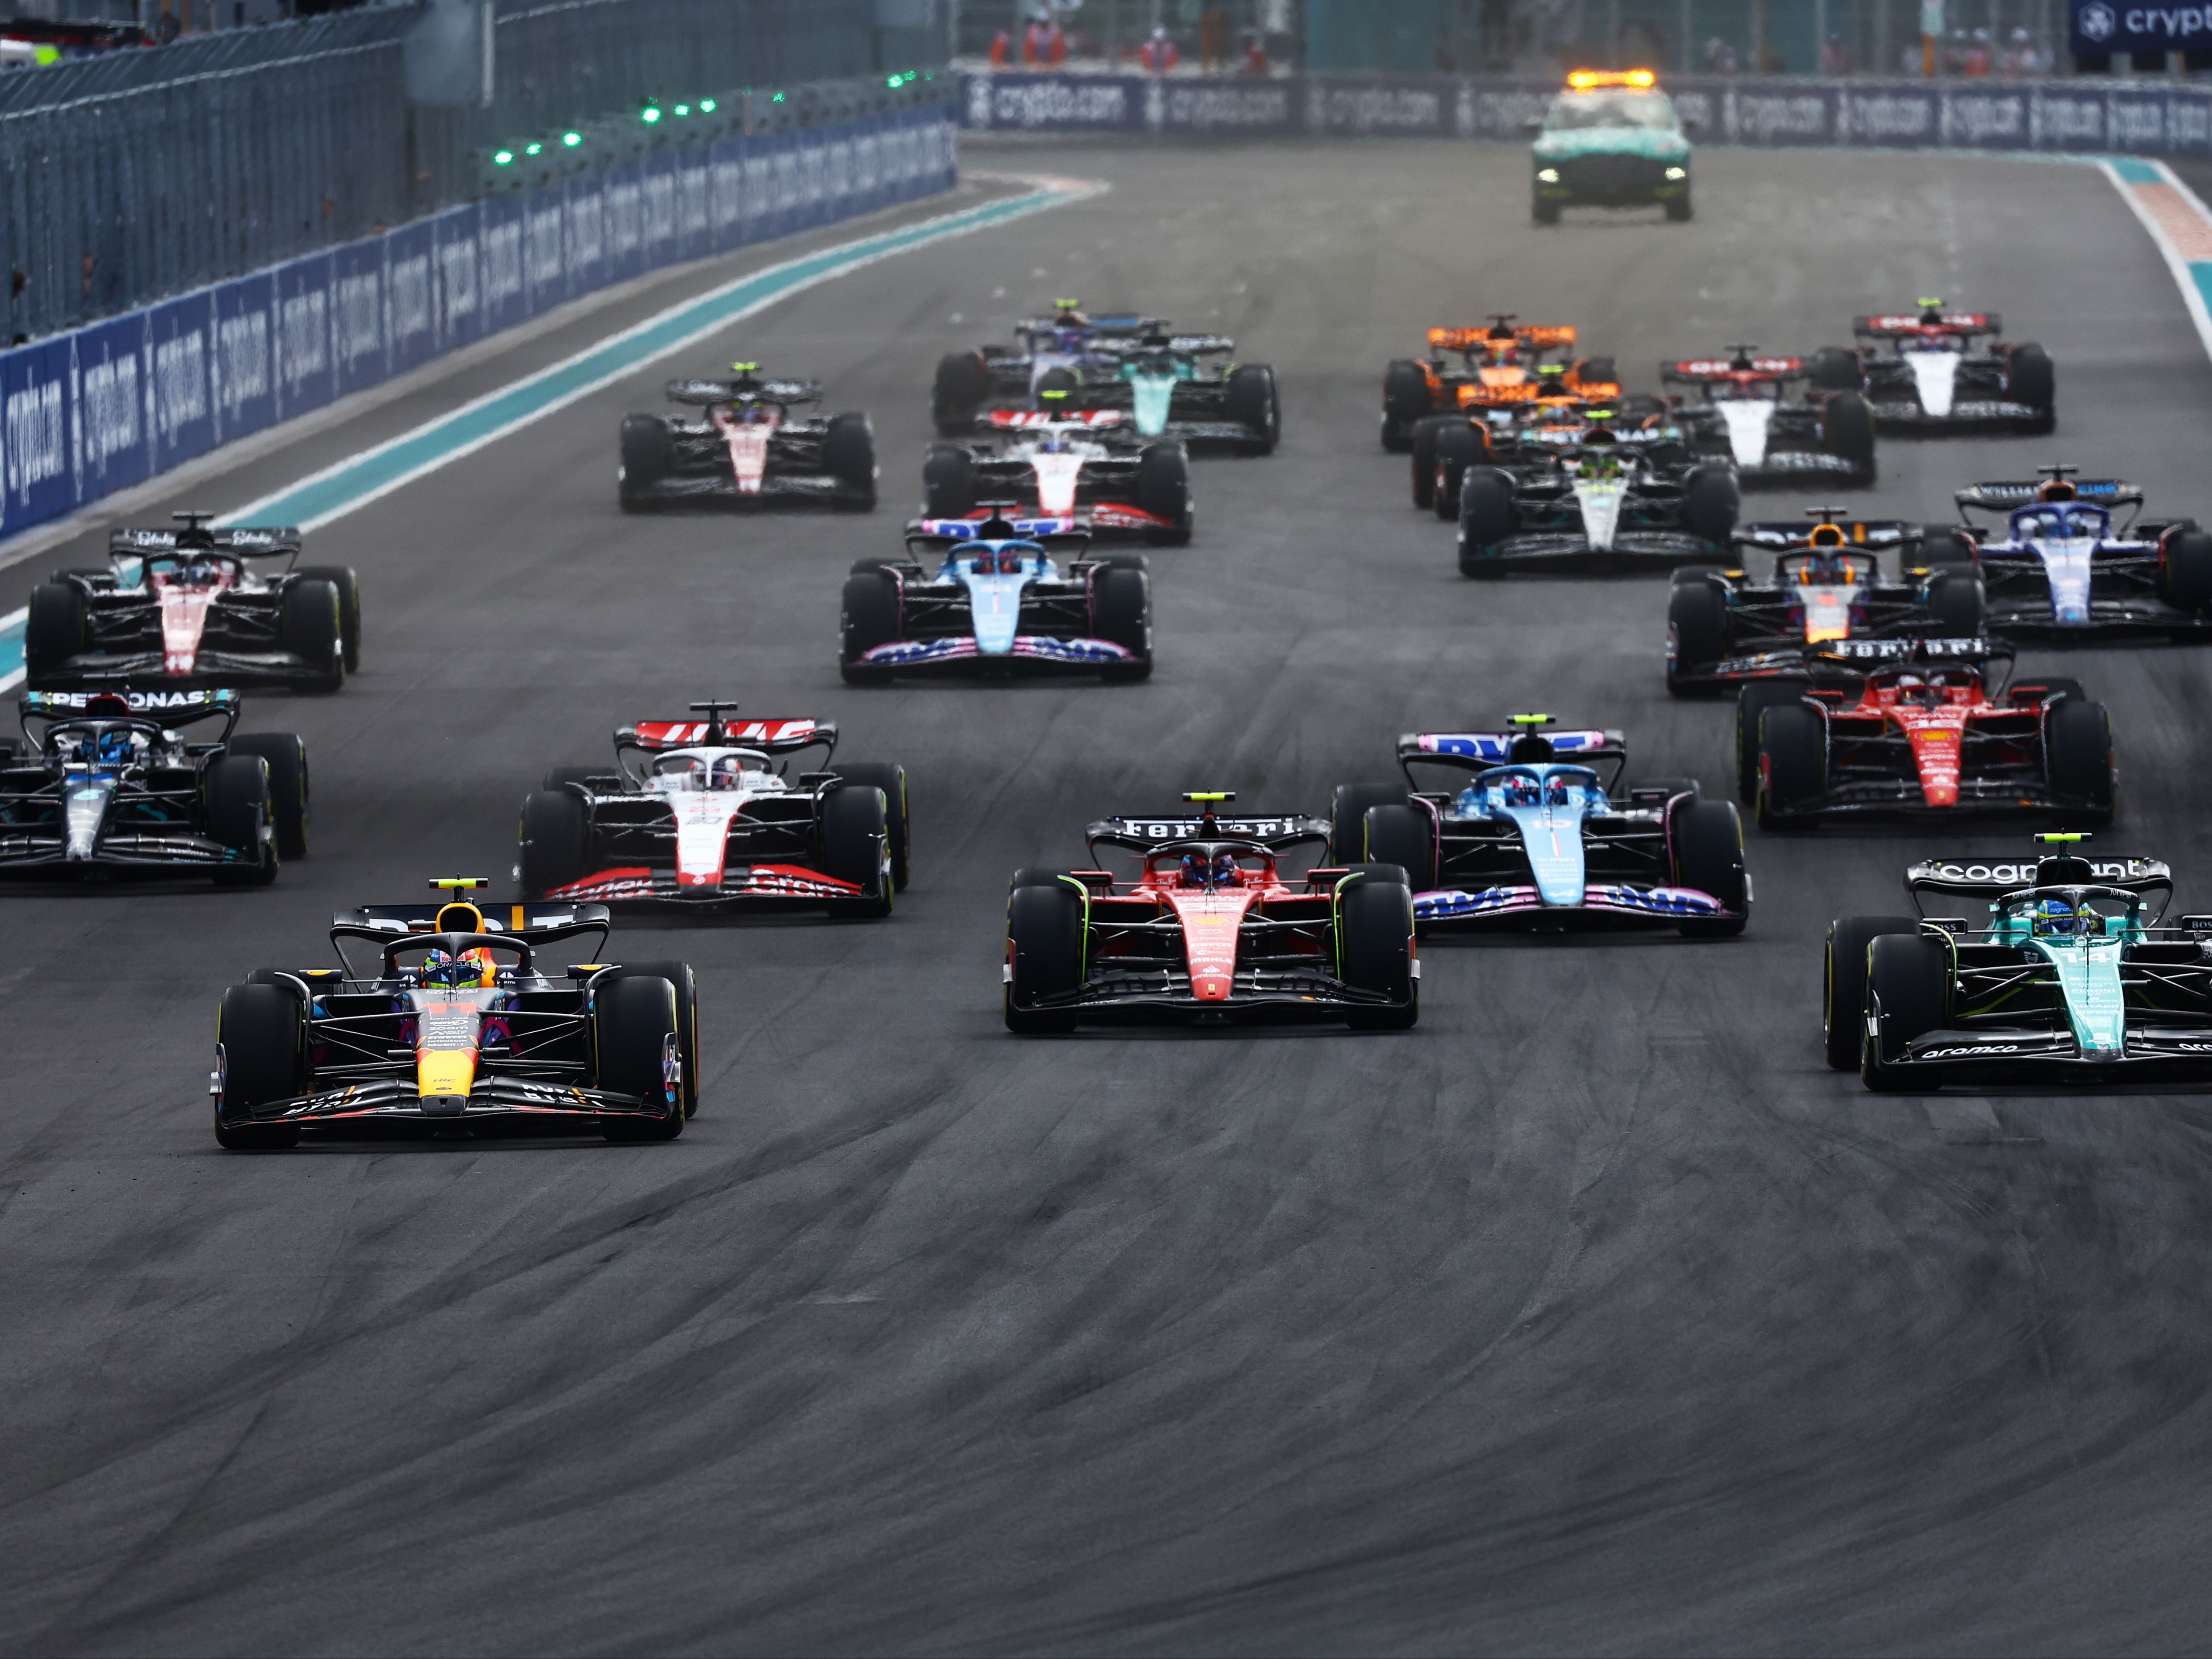 Sergio Perez (11) leads Fernando Alonso (14) and the rest of the field into turn one at the start of the 2023 F1 Miami Grand Prix. (Photo by Mark Thompson/Getty Images)